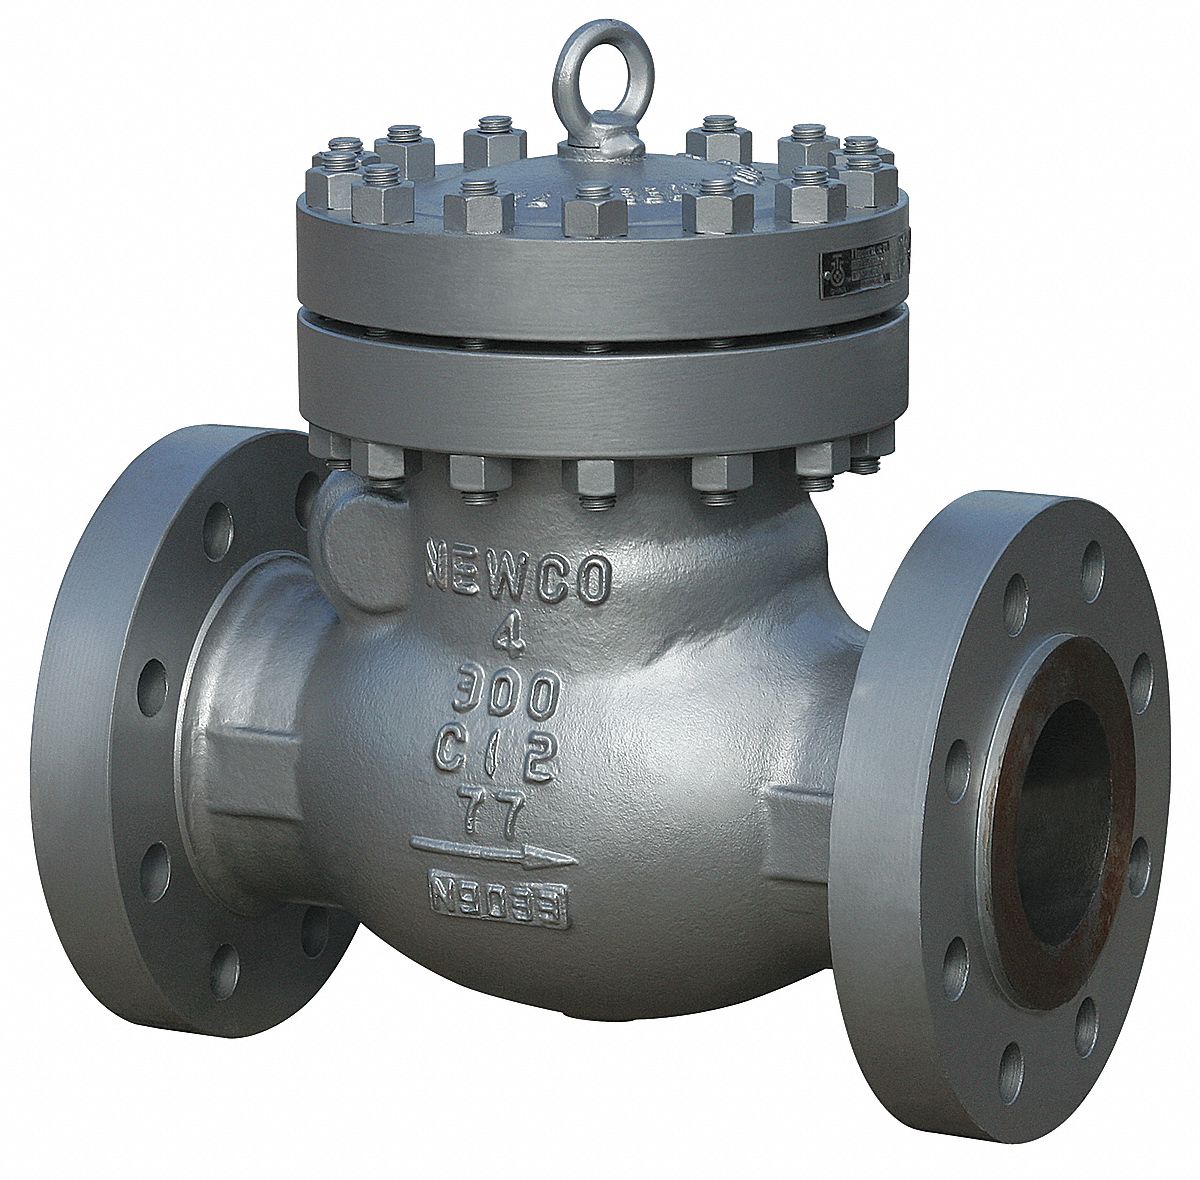 NEWCO Check Valve, 12 in, Single, Inline Swing, Carbon Steel, Flange x